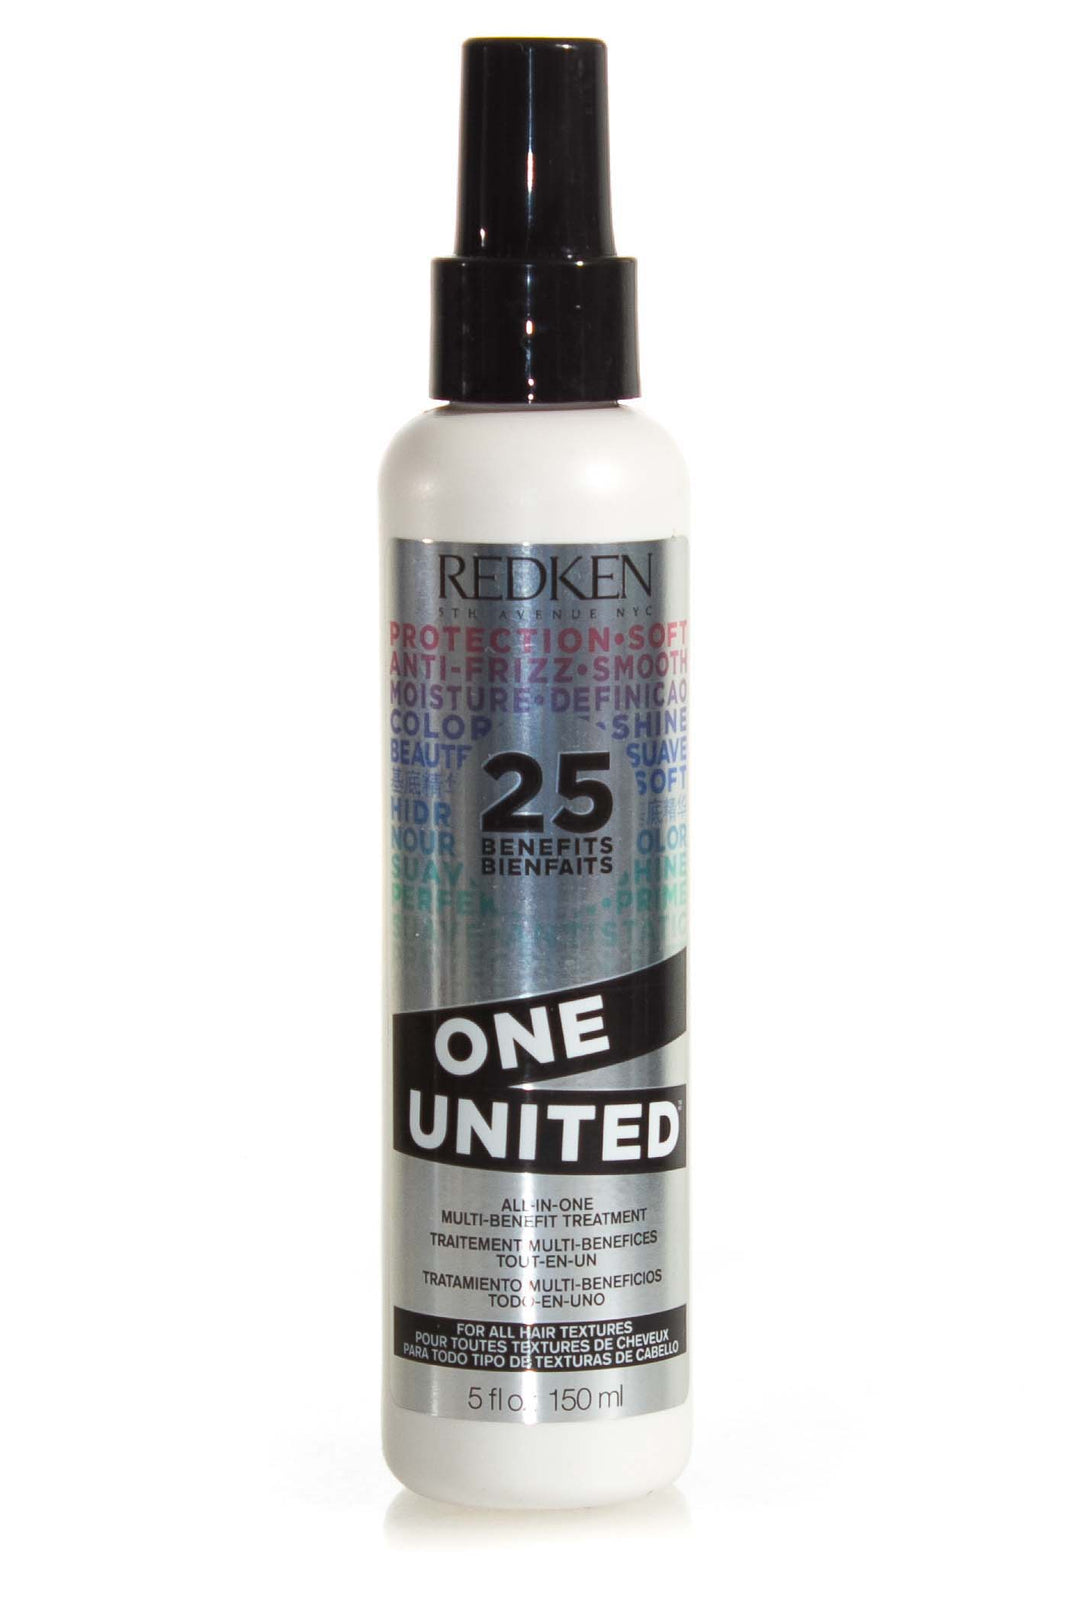 redken-one-united-all-in-one-treatment-150ml